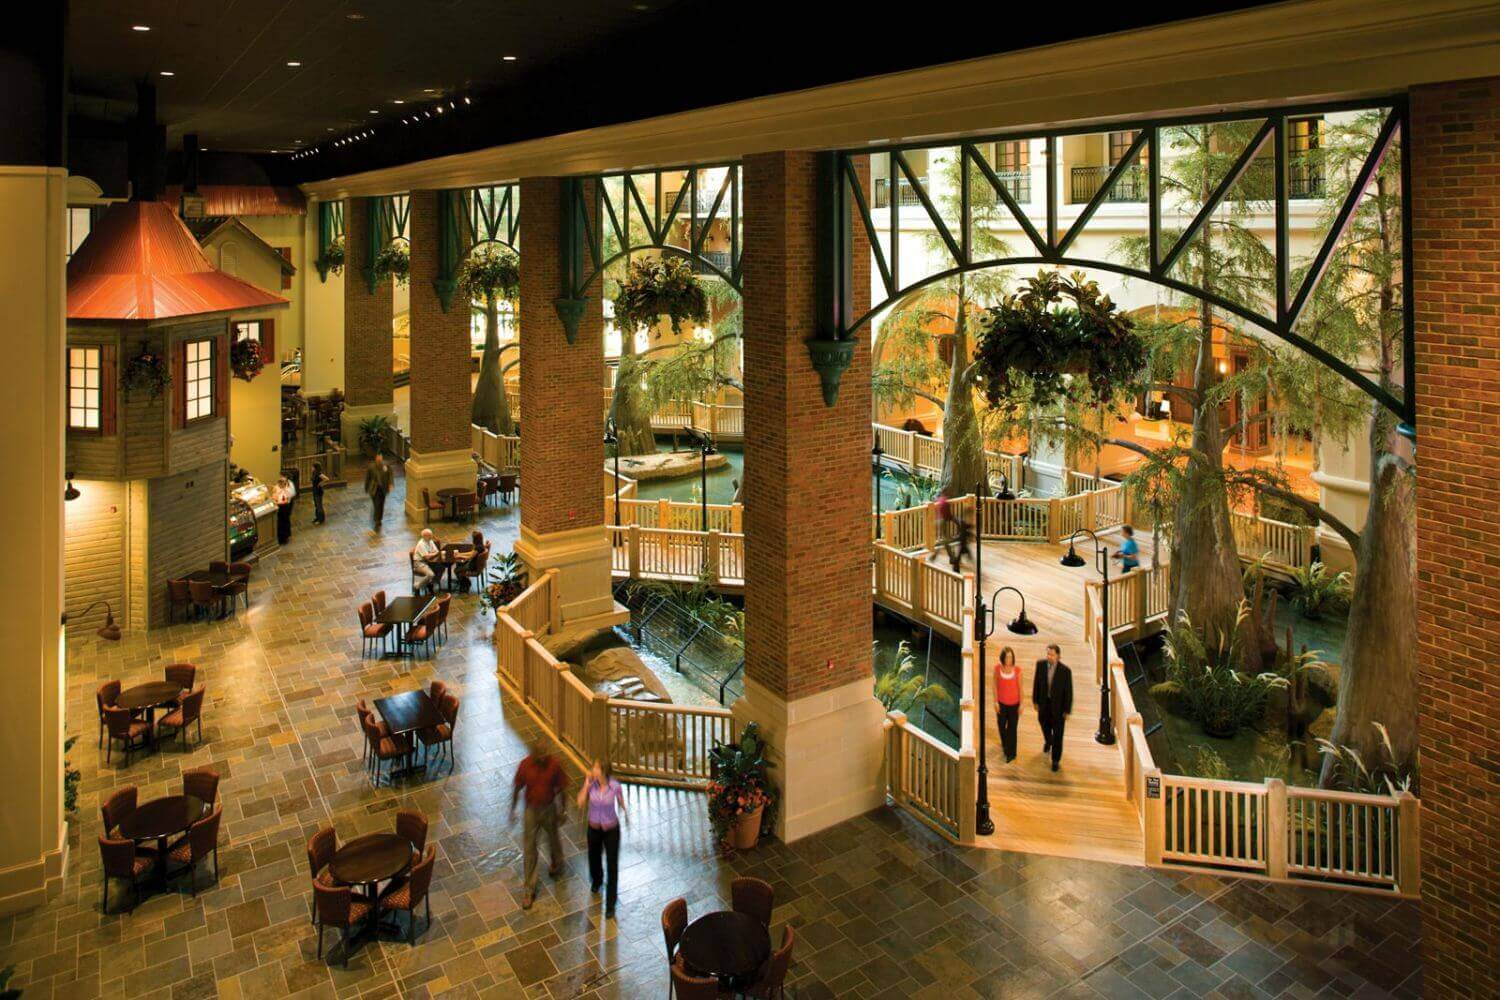 Overhead view of atrium with live alligators and artificial trees at Paragon Hotel & Casino